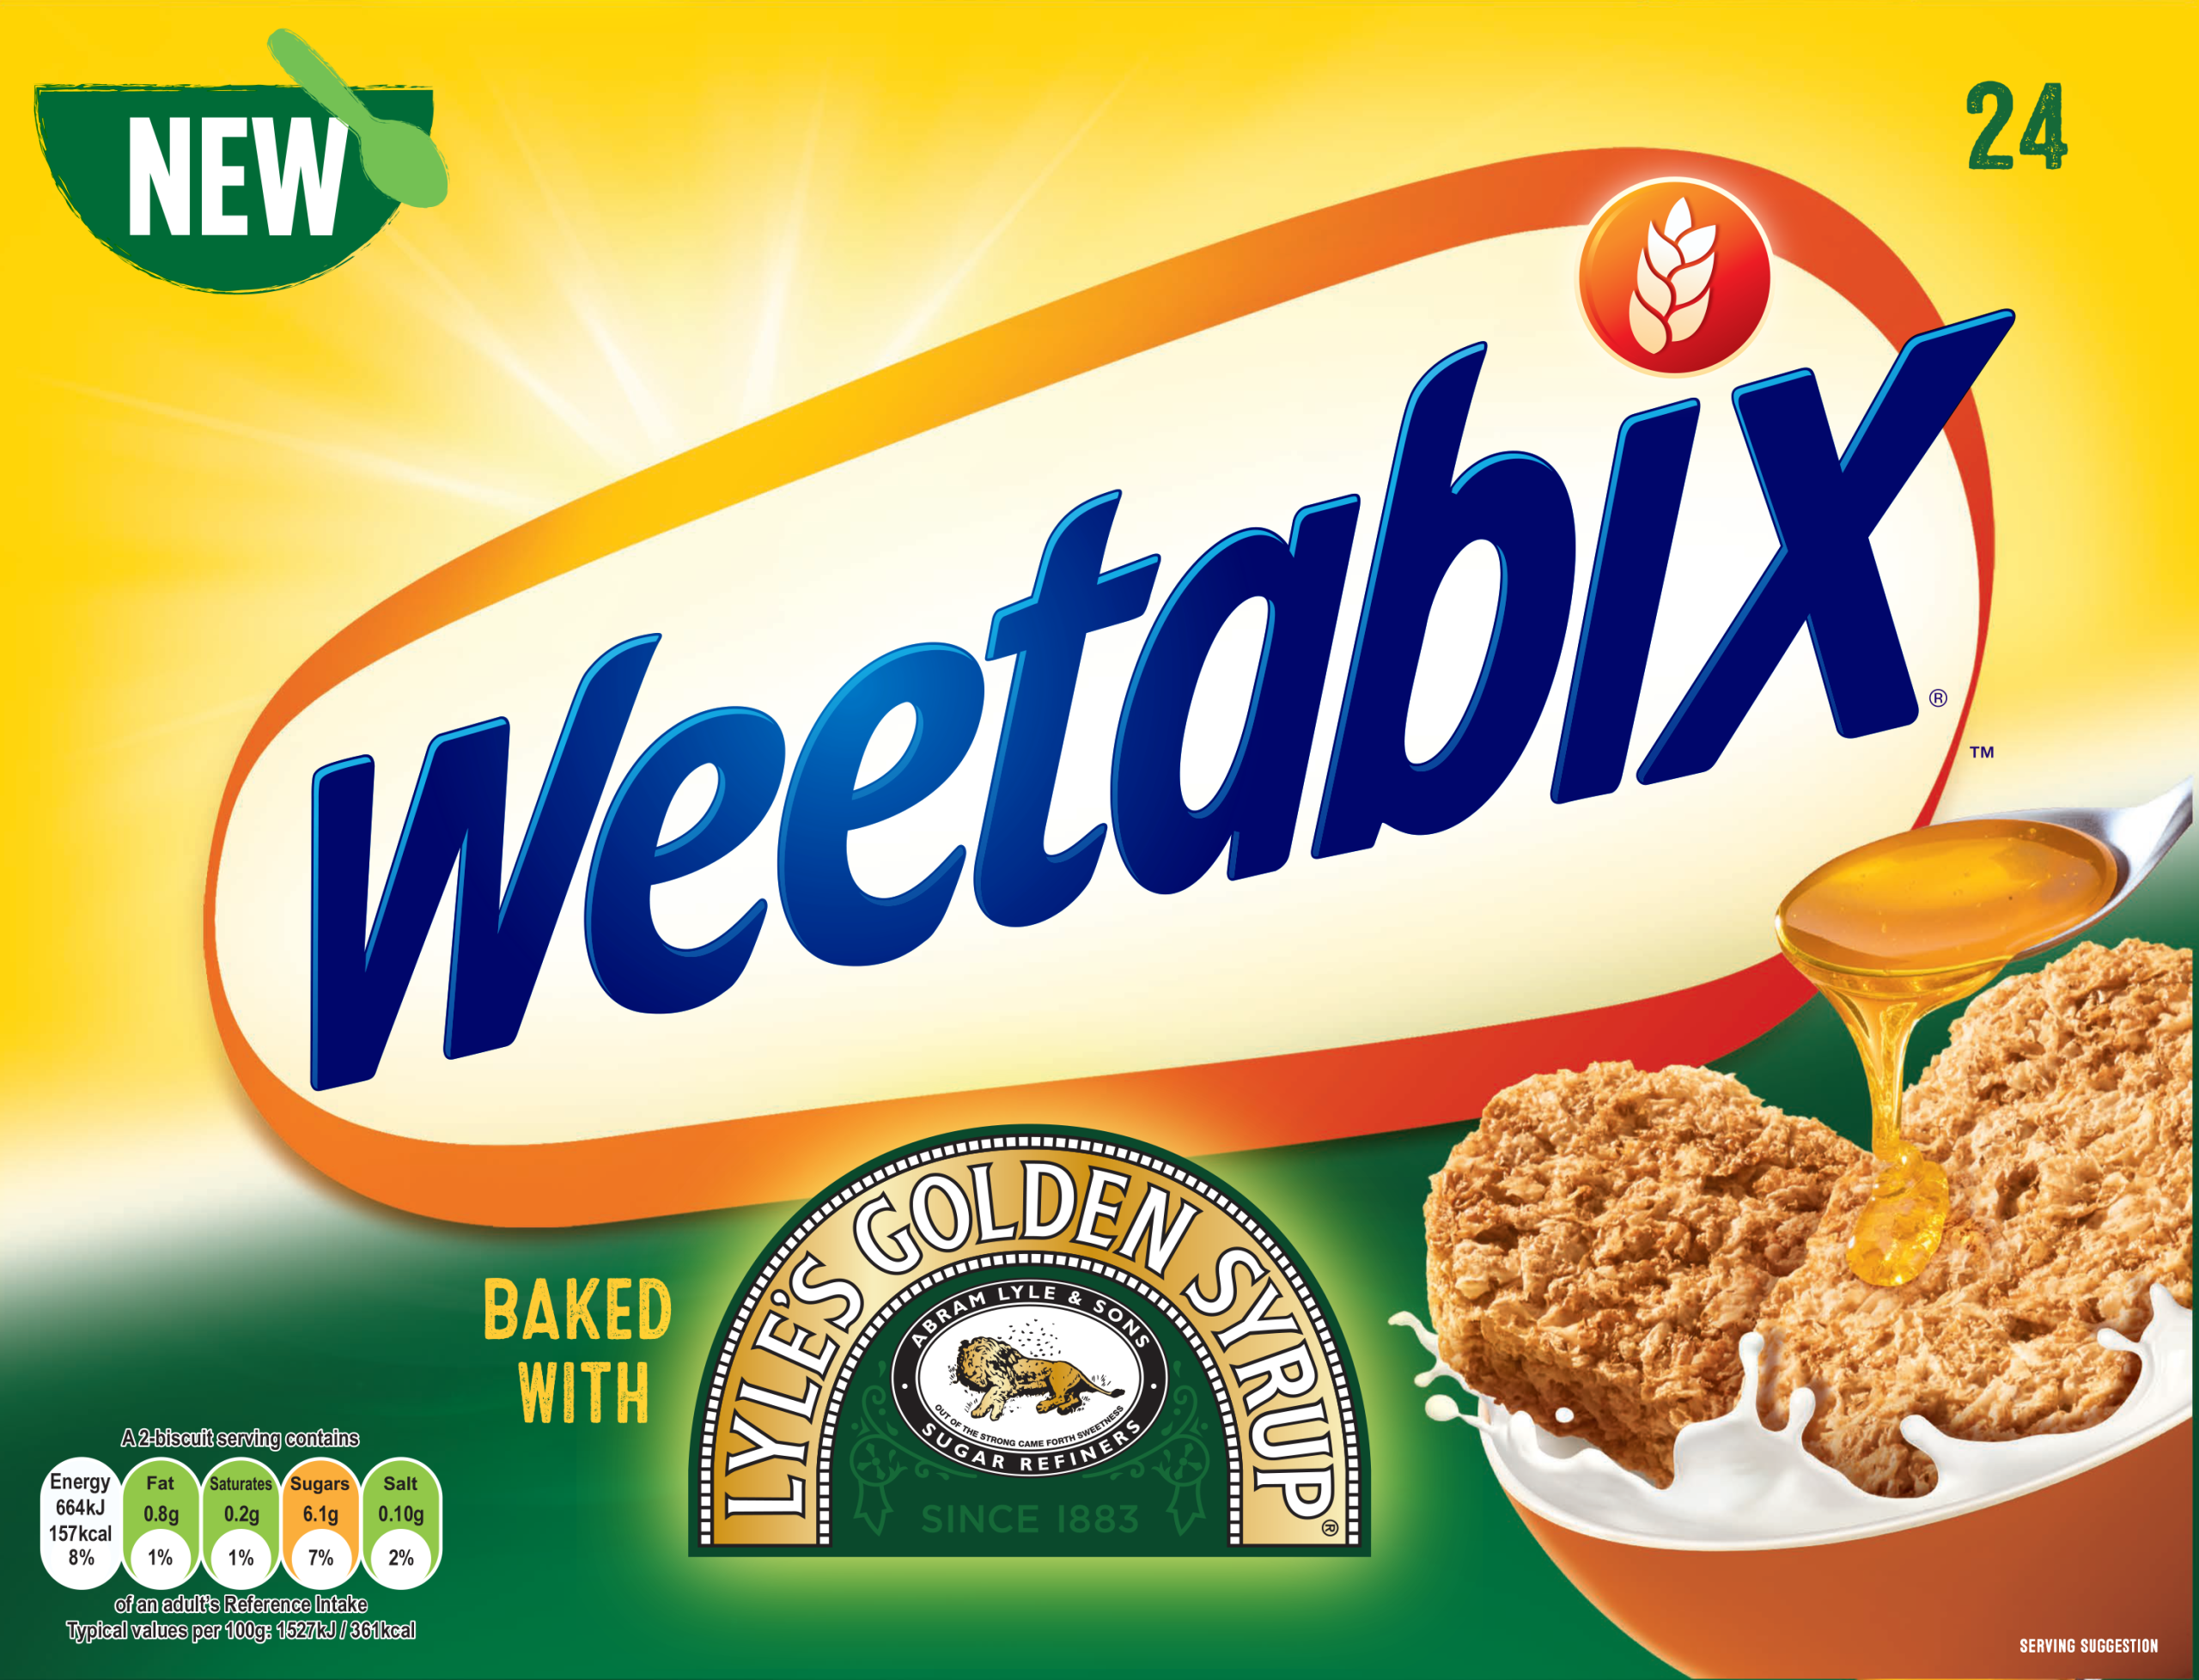 Make mornings sweeter with Weetabix and Lyle’s Golden Syrup